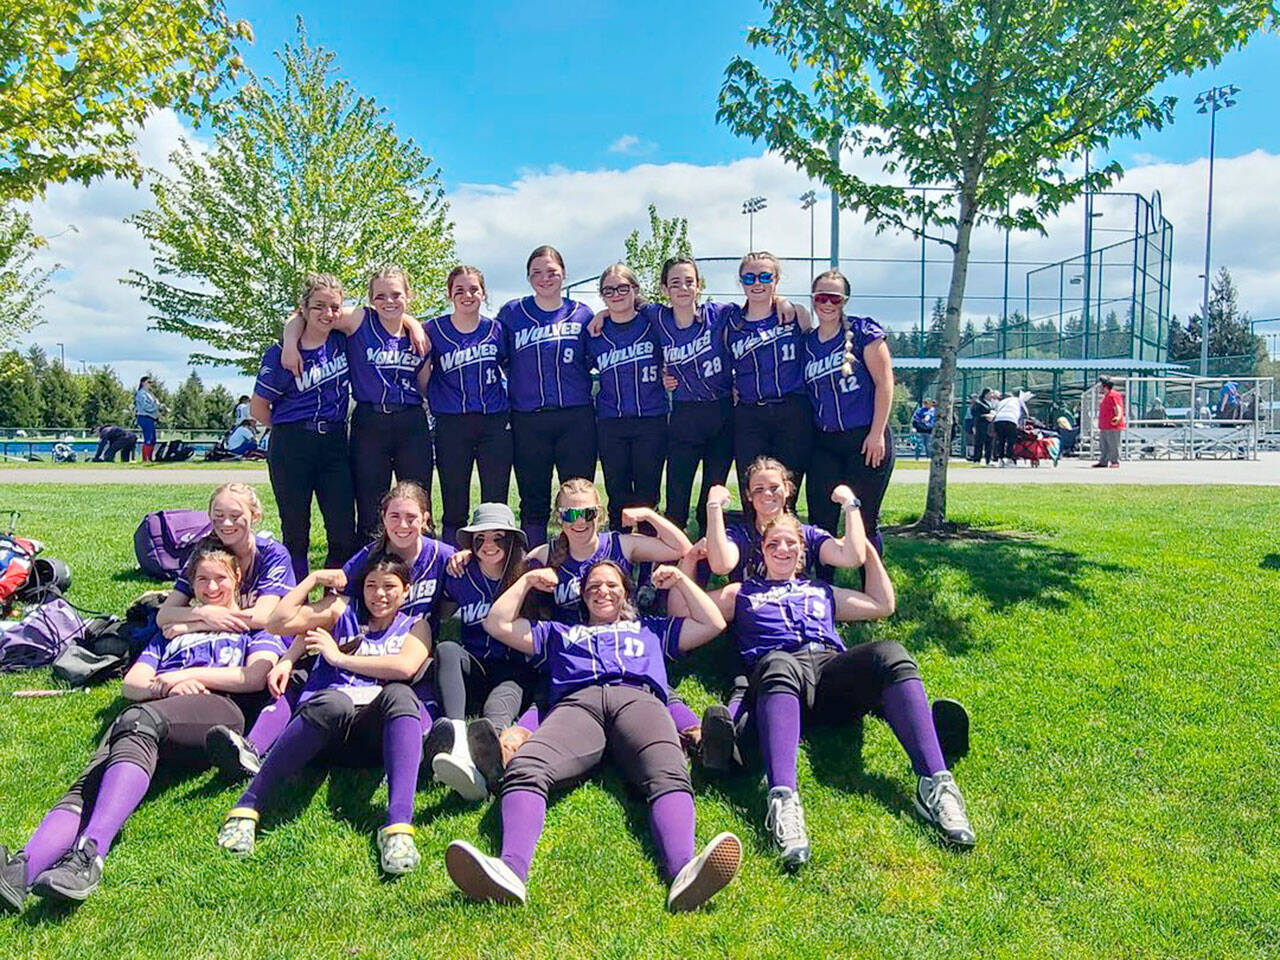 Sequim softball players relax after swamping Sammamish 21-1 in the Class 2A West Central District Softball Tournament at the RAC in Lacey. The Wolves sealed a state tournament berth with the win.